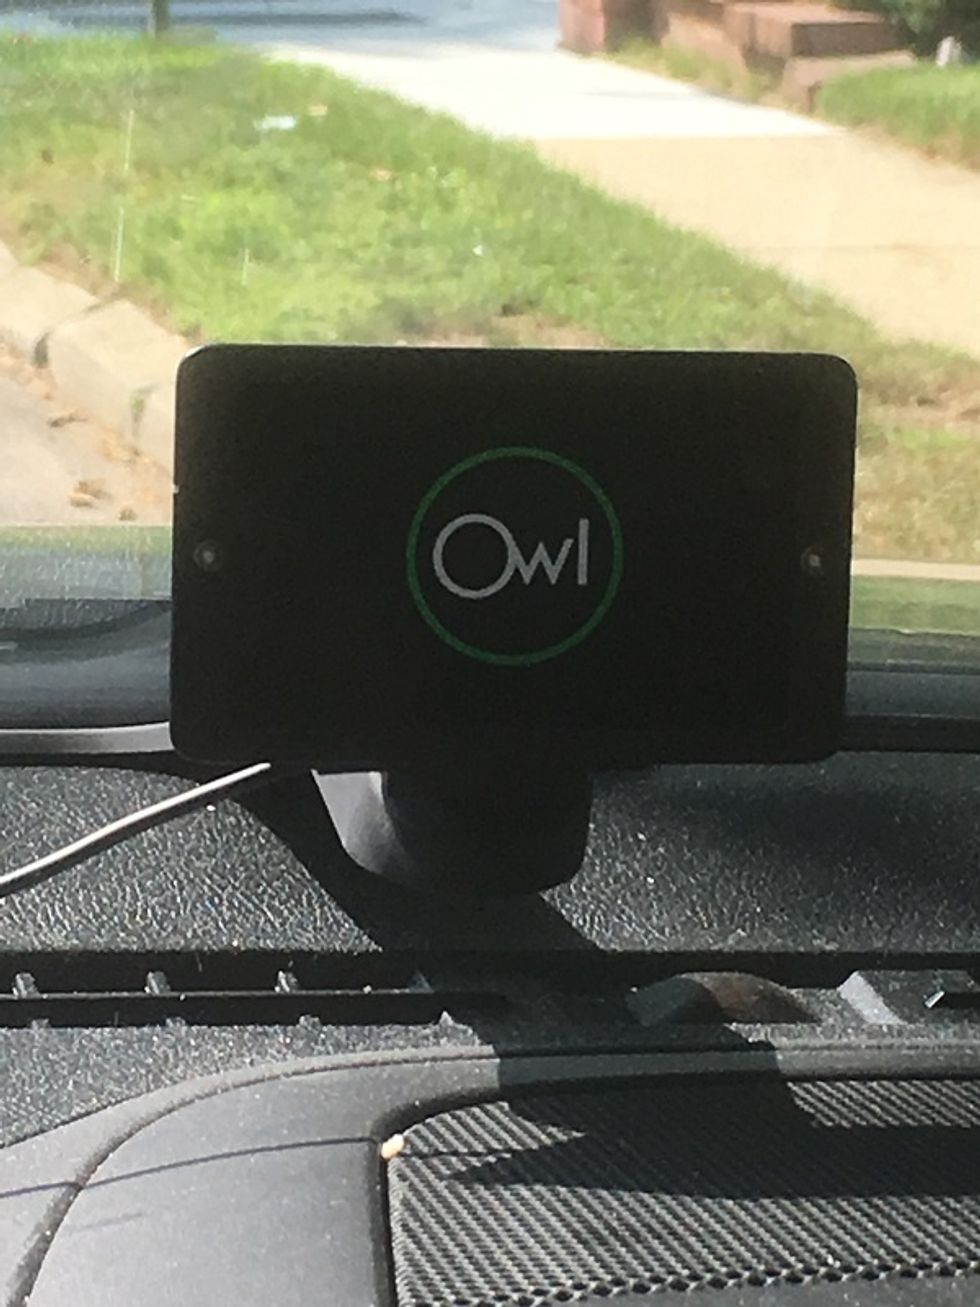 Picture of Owl Dash Cam on a car dashboard